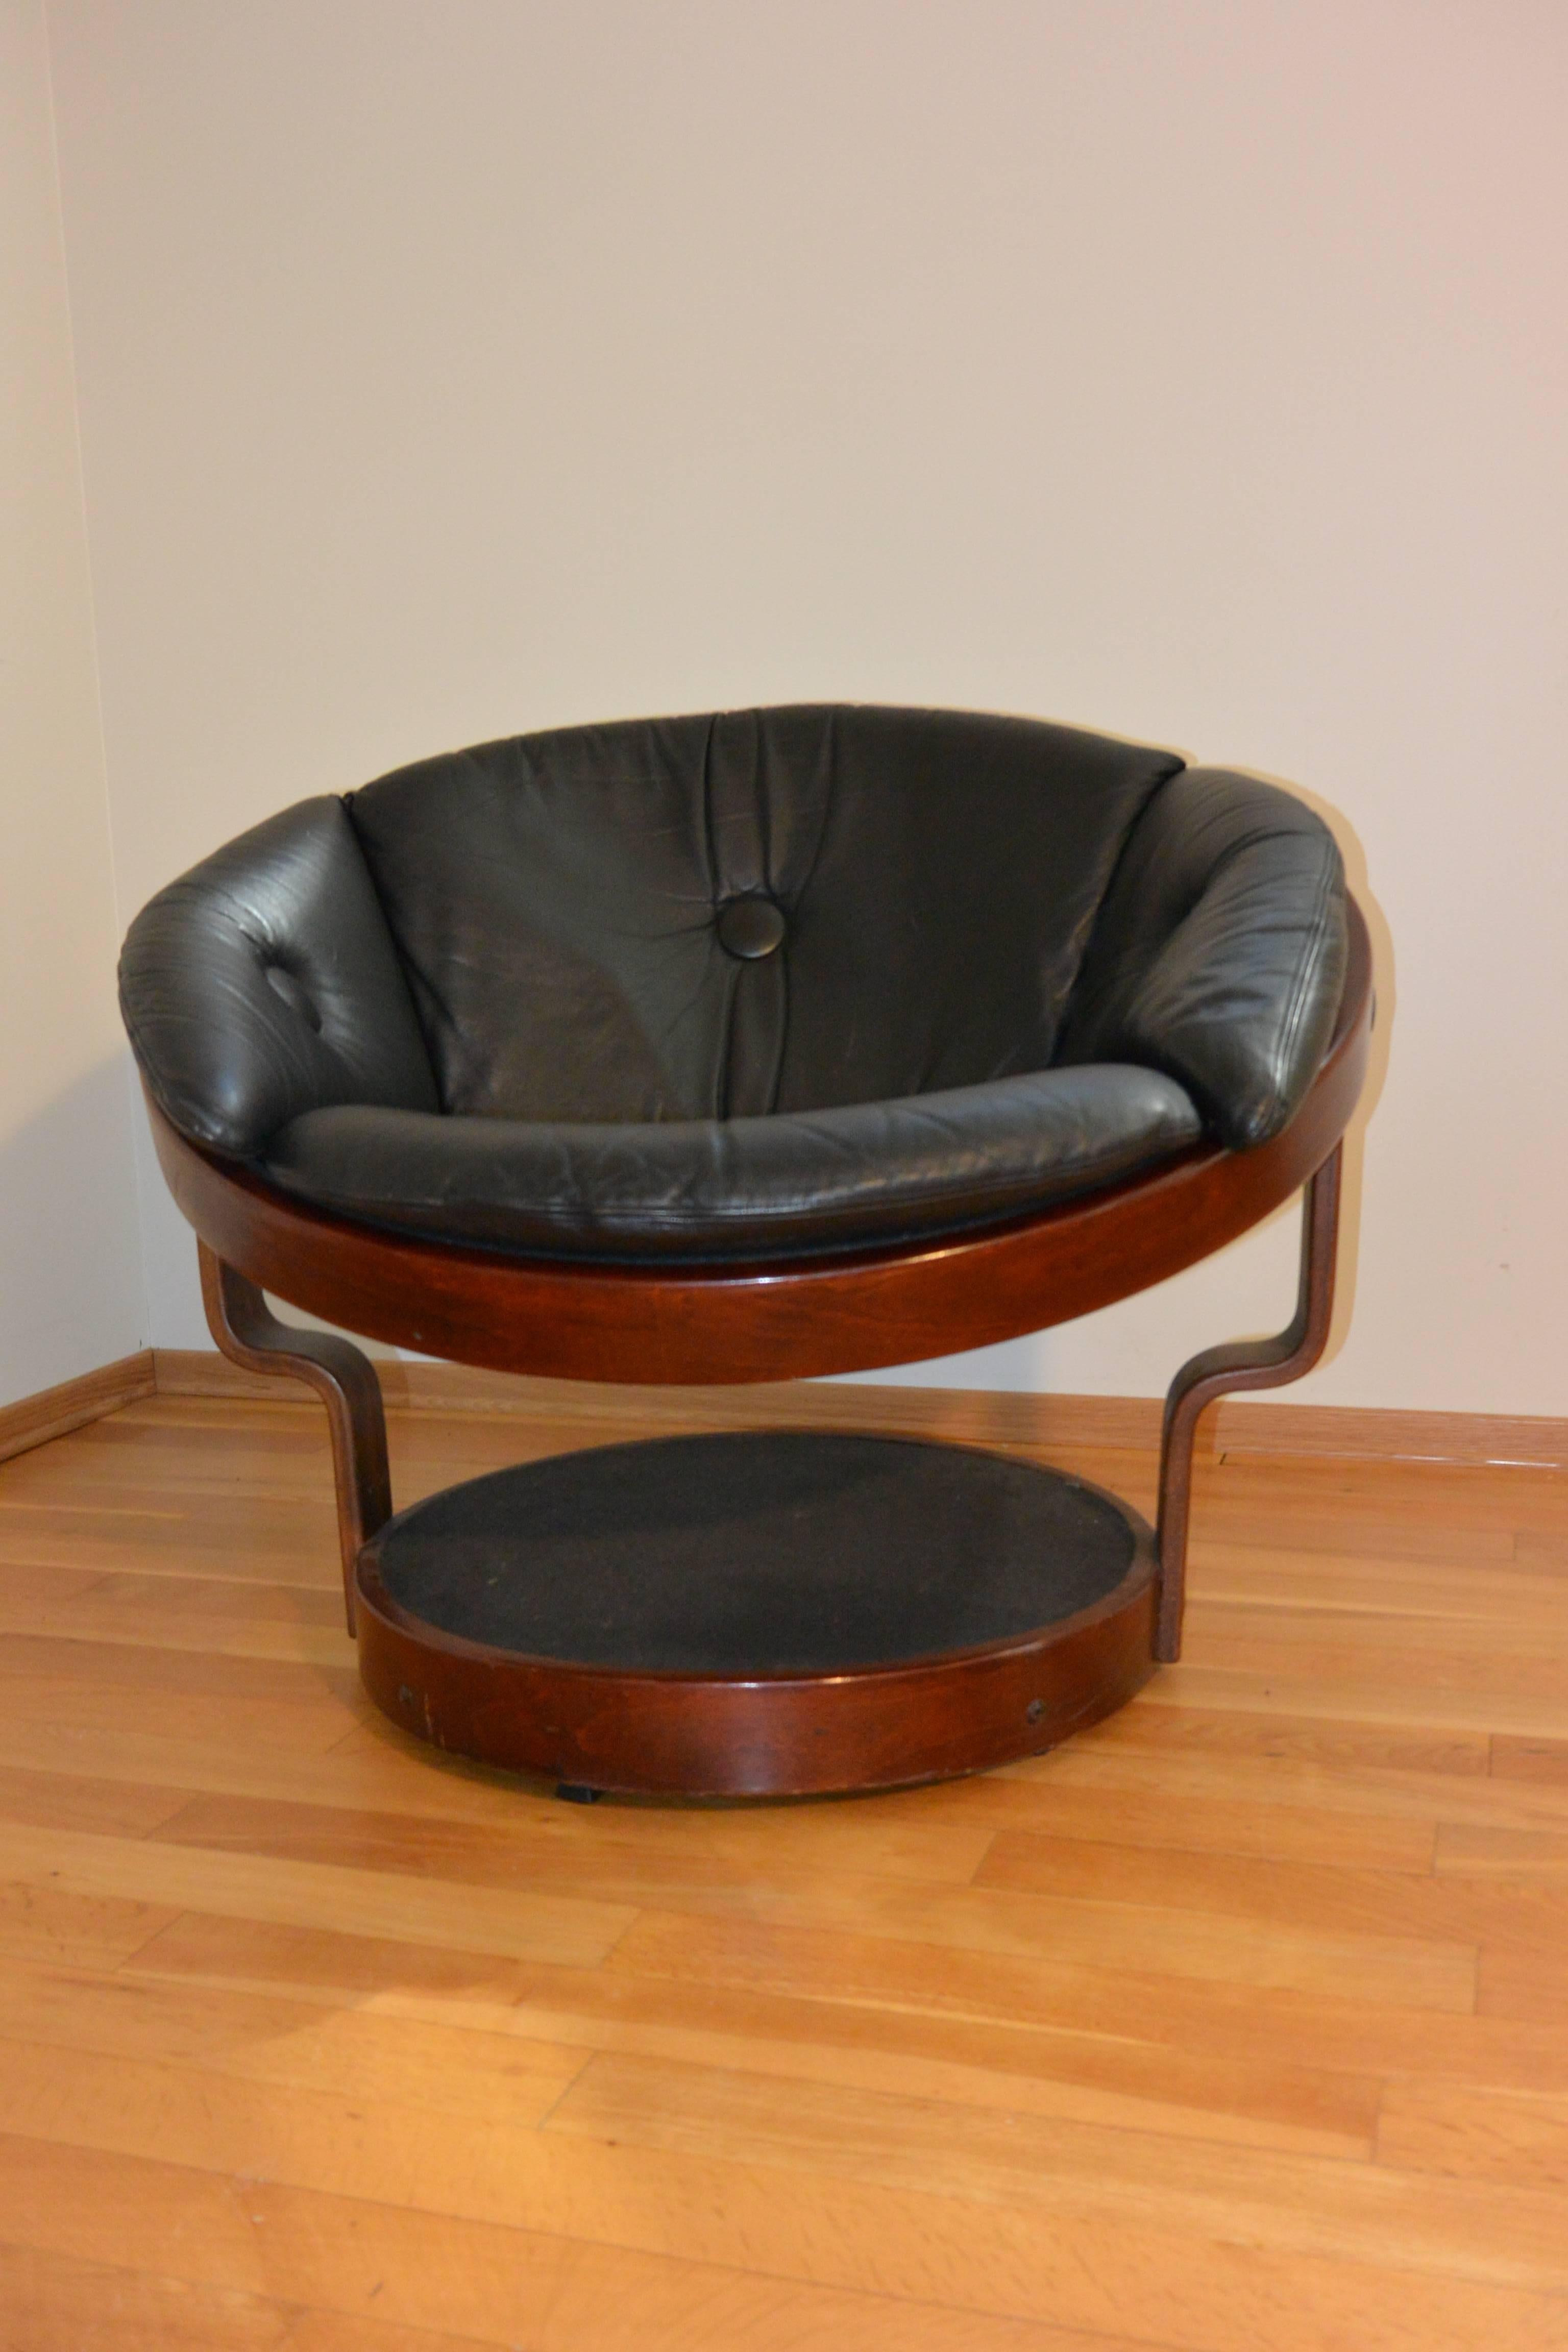 Black leather swivel chair by Oddmund Vadd, Norway.

The swivel chair is made from beech/laminated rosewood and bent into shape. The canvas is made from woven nylon to create a hammock effect to support the black leather cushion. The chair has a